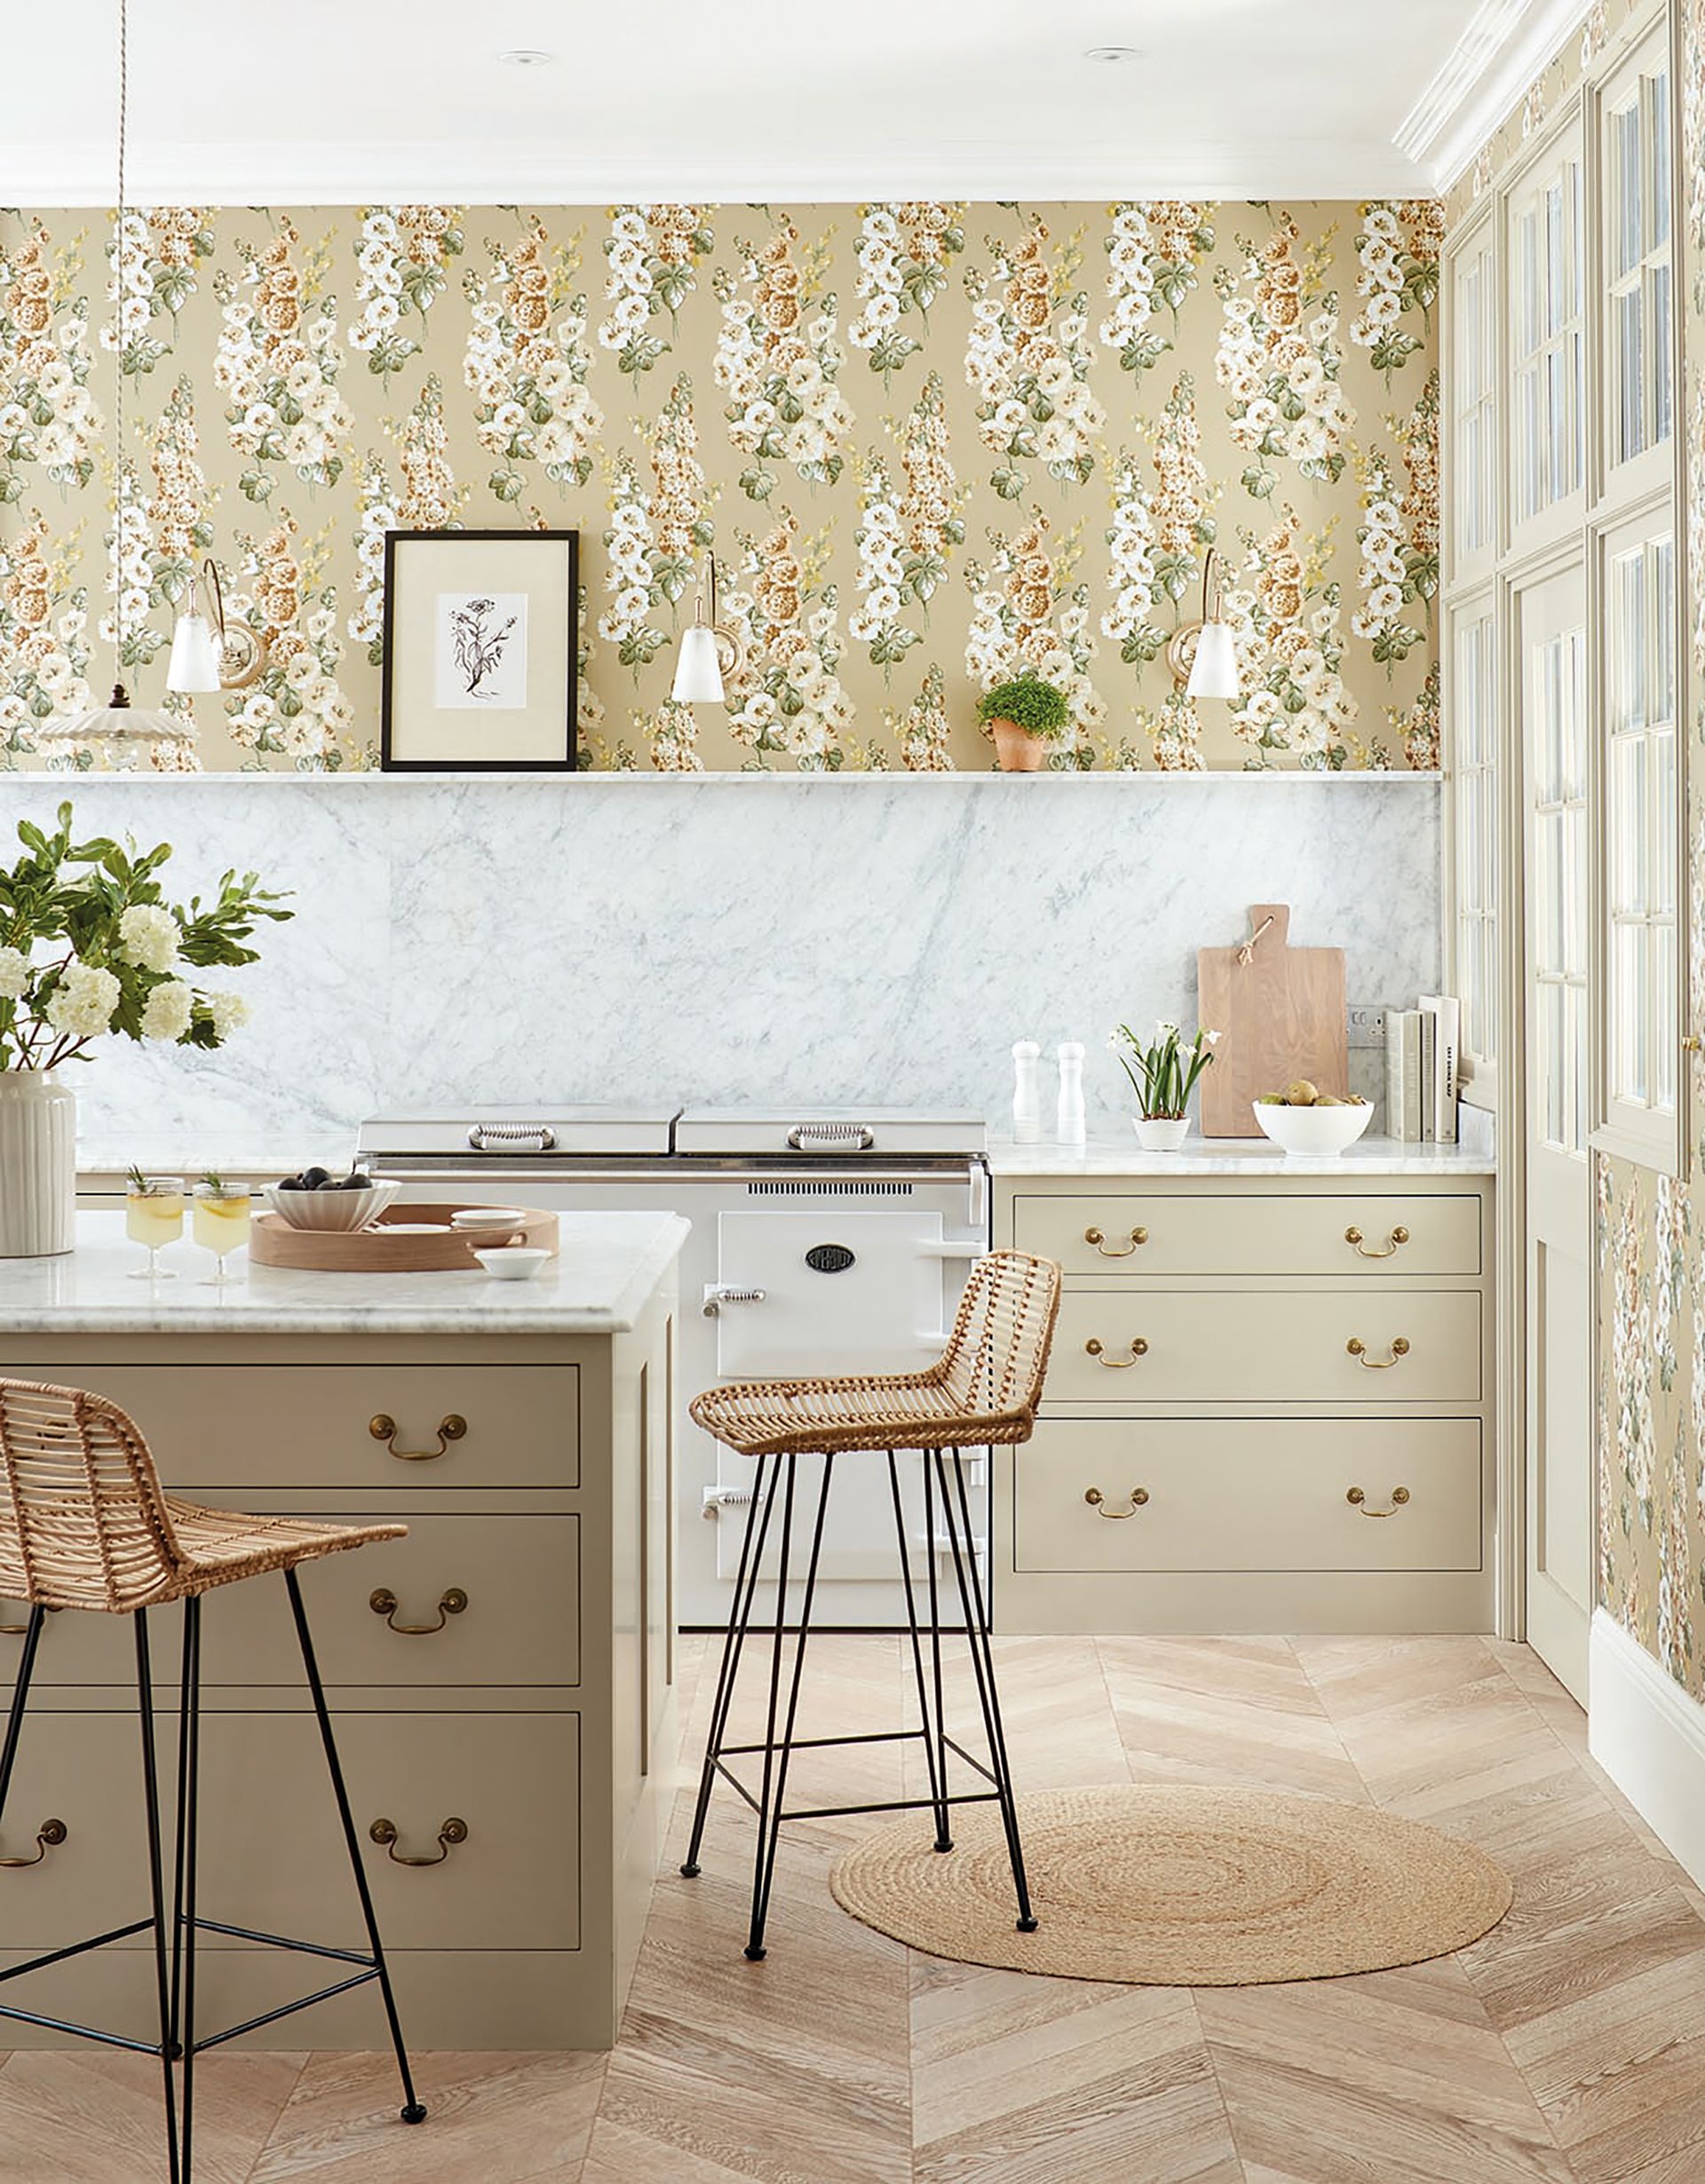 Kitchen wallpaper ideas: 10 inspiring looks for your space